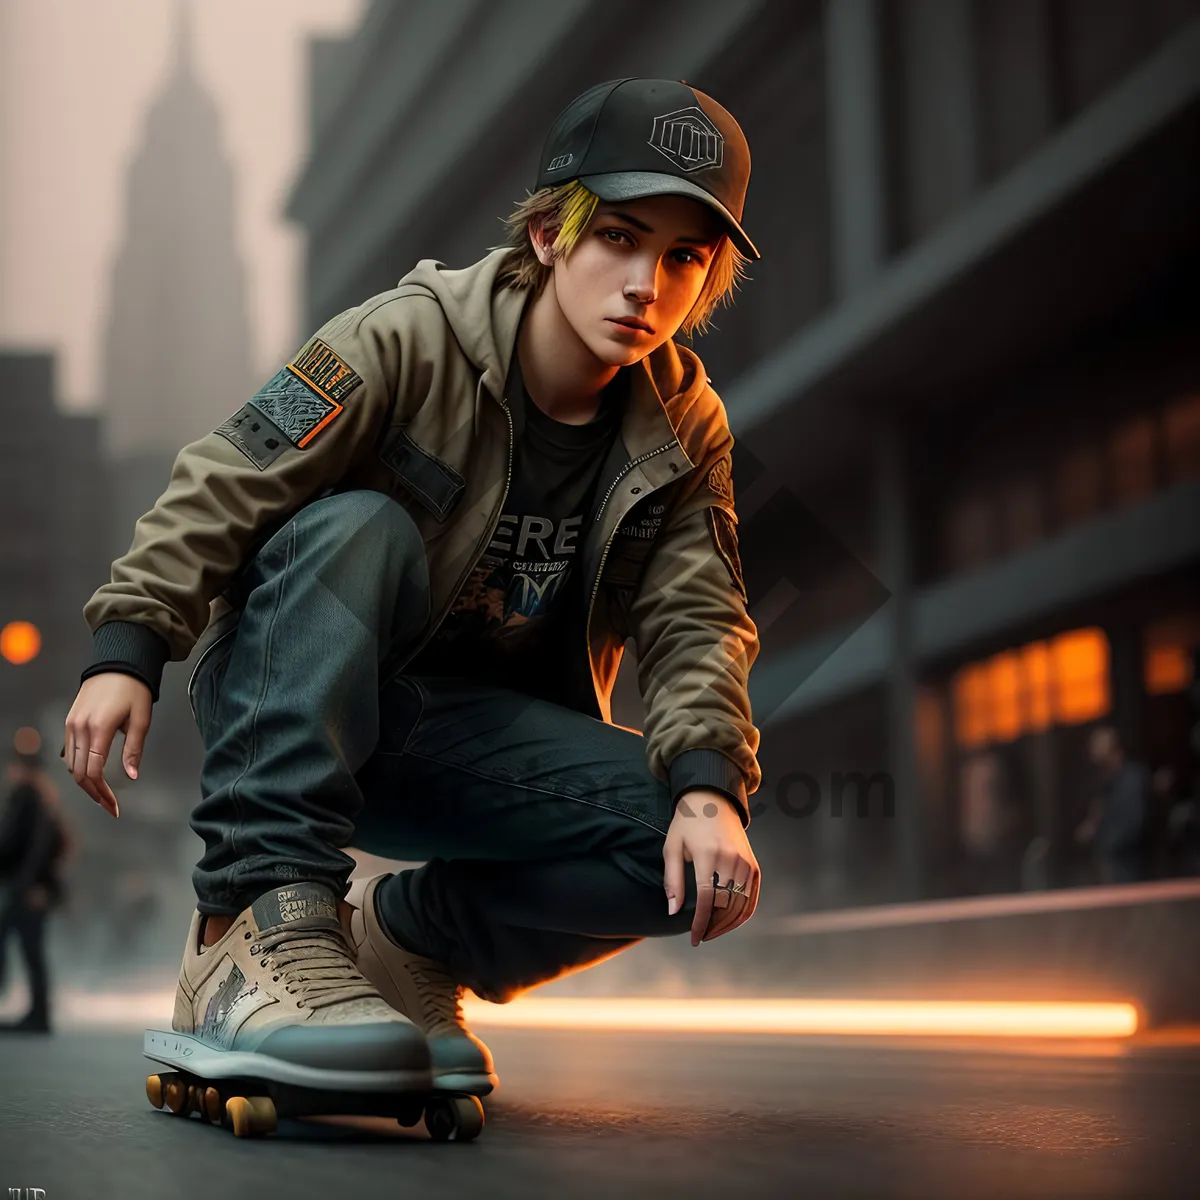 Picture of Skateboarding action photo: Male skater on board